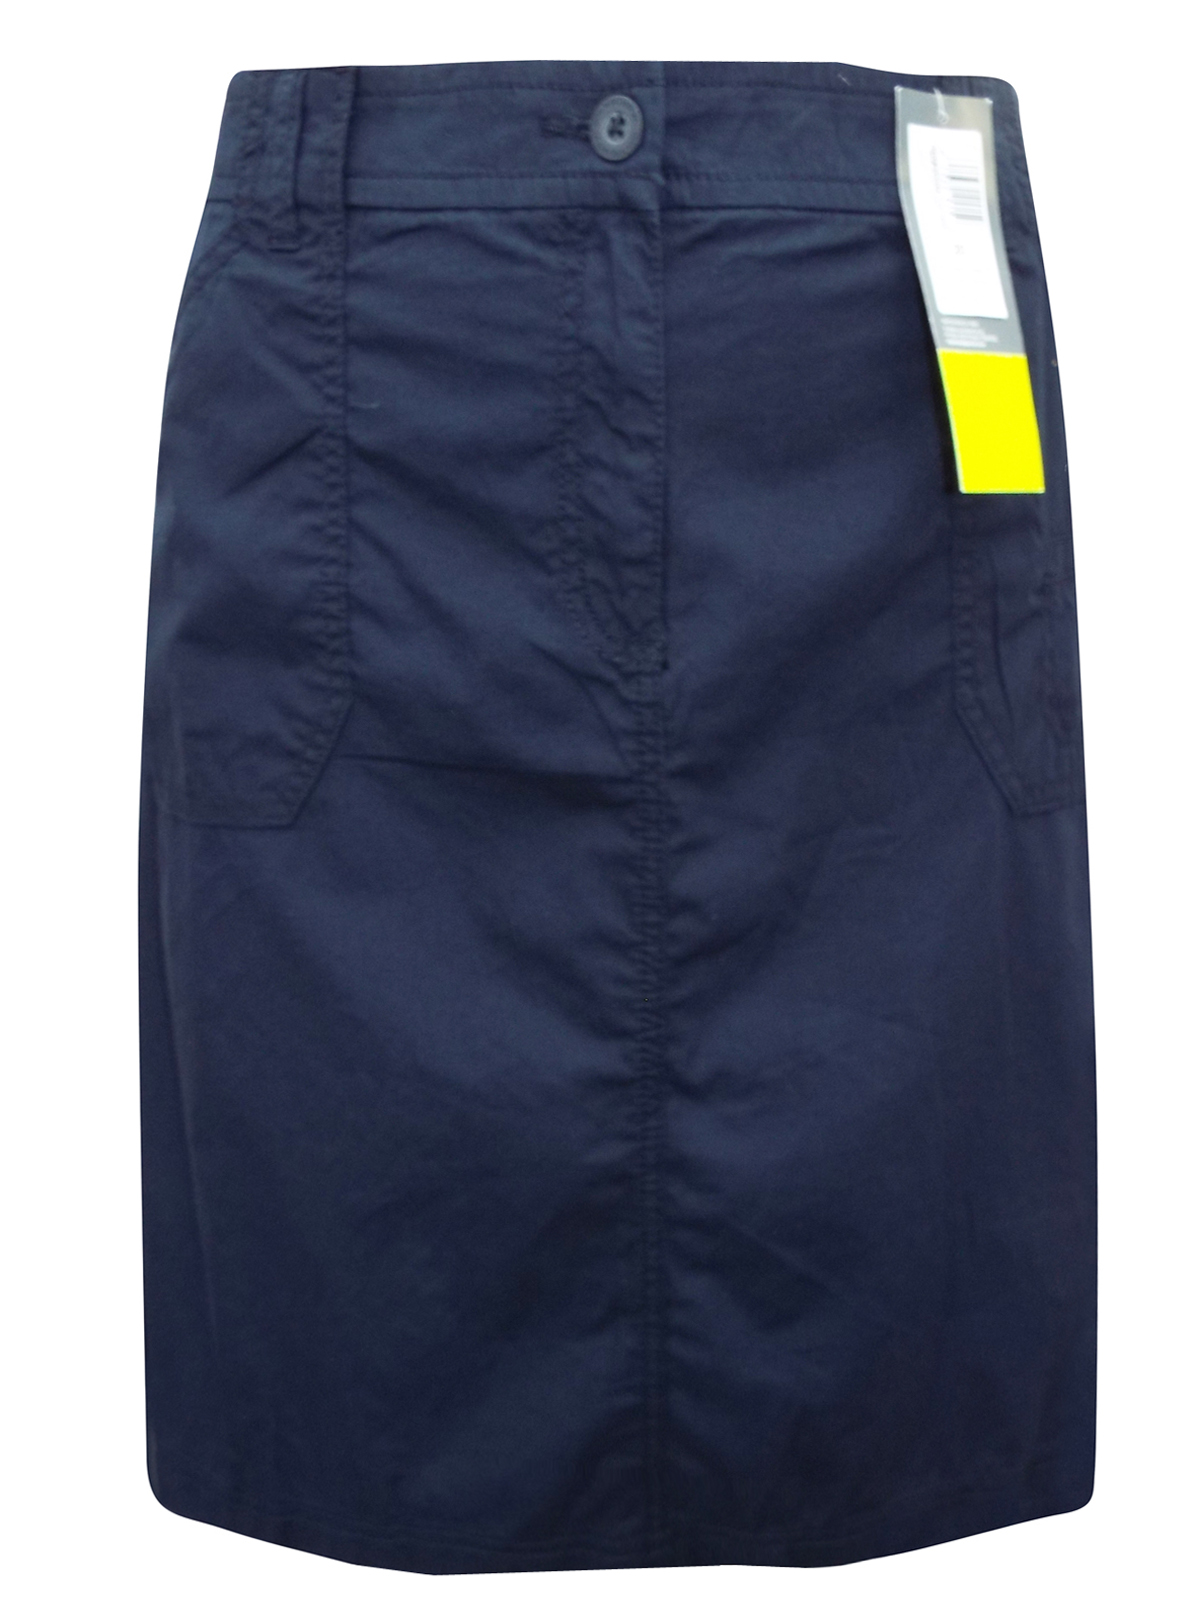 Marks and Spencer - - M&5 NAVY Pure Cotton Cargo Skirt - Size 20 to 24